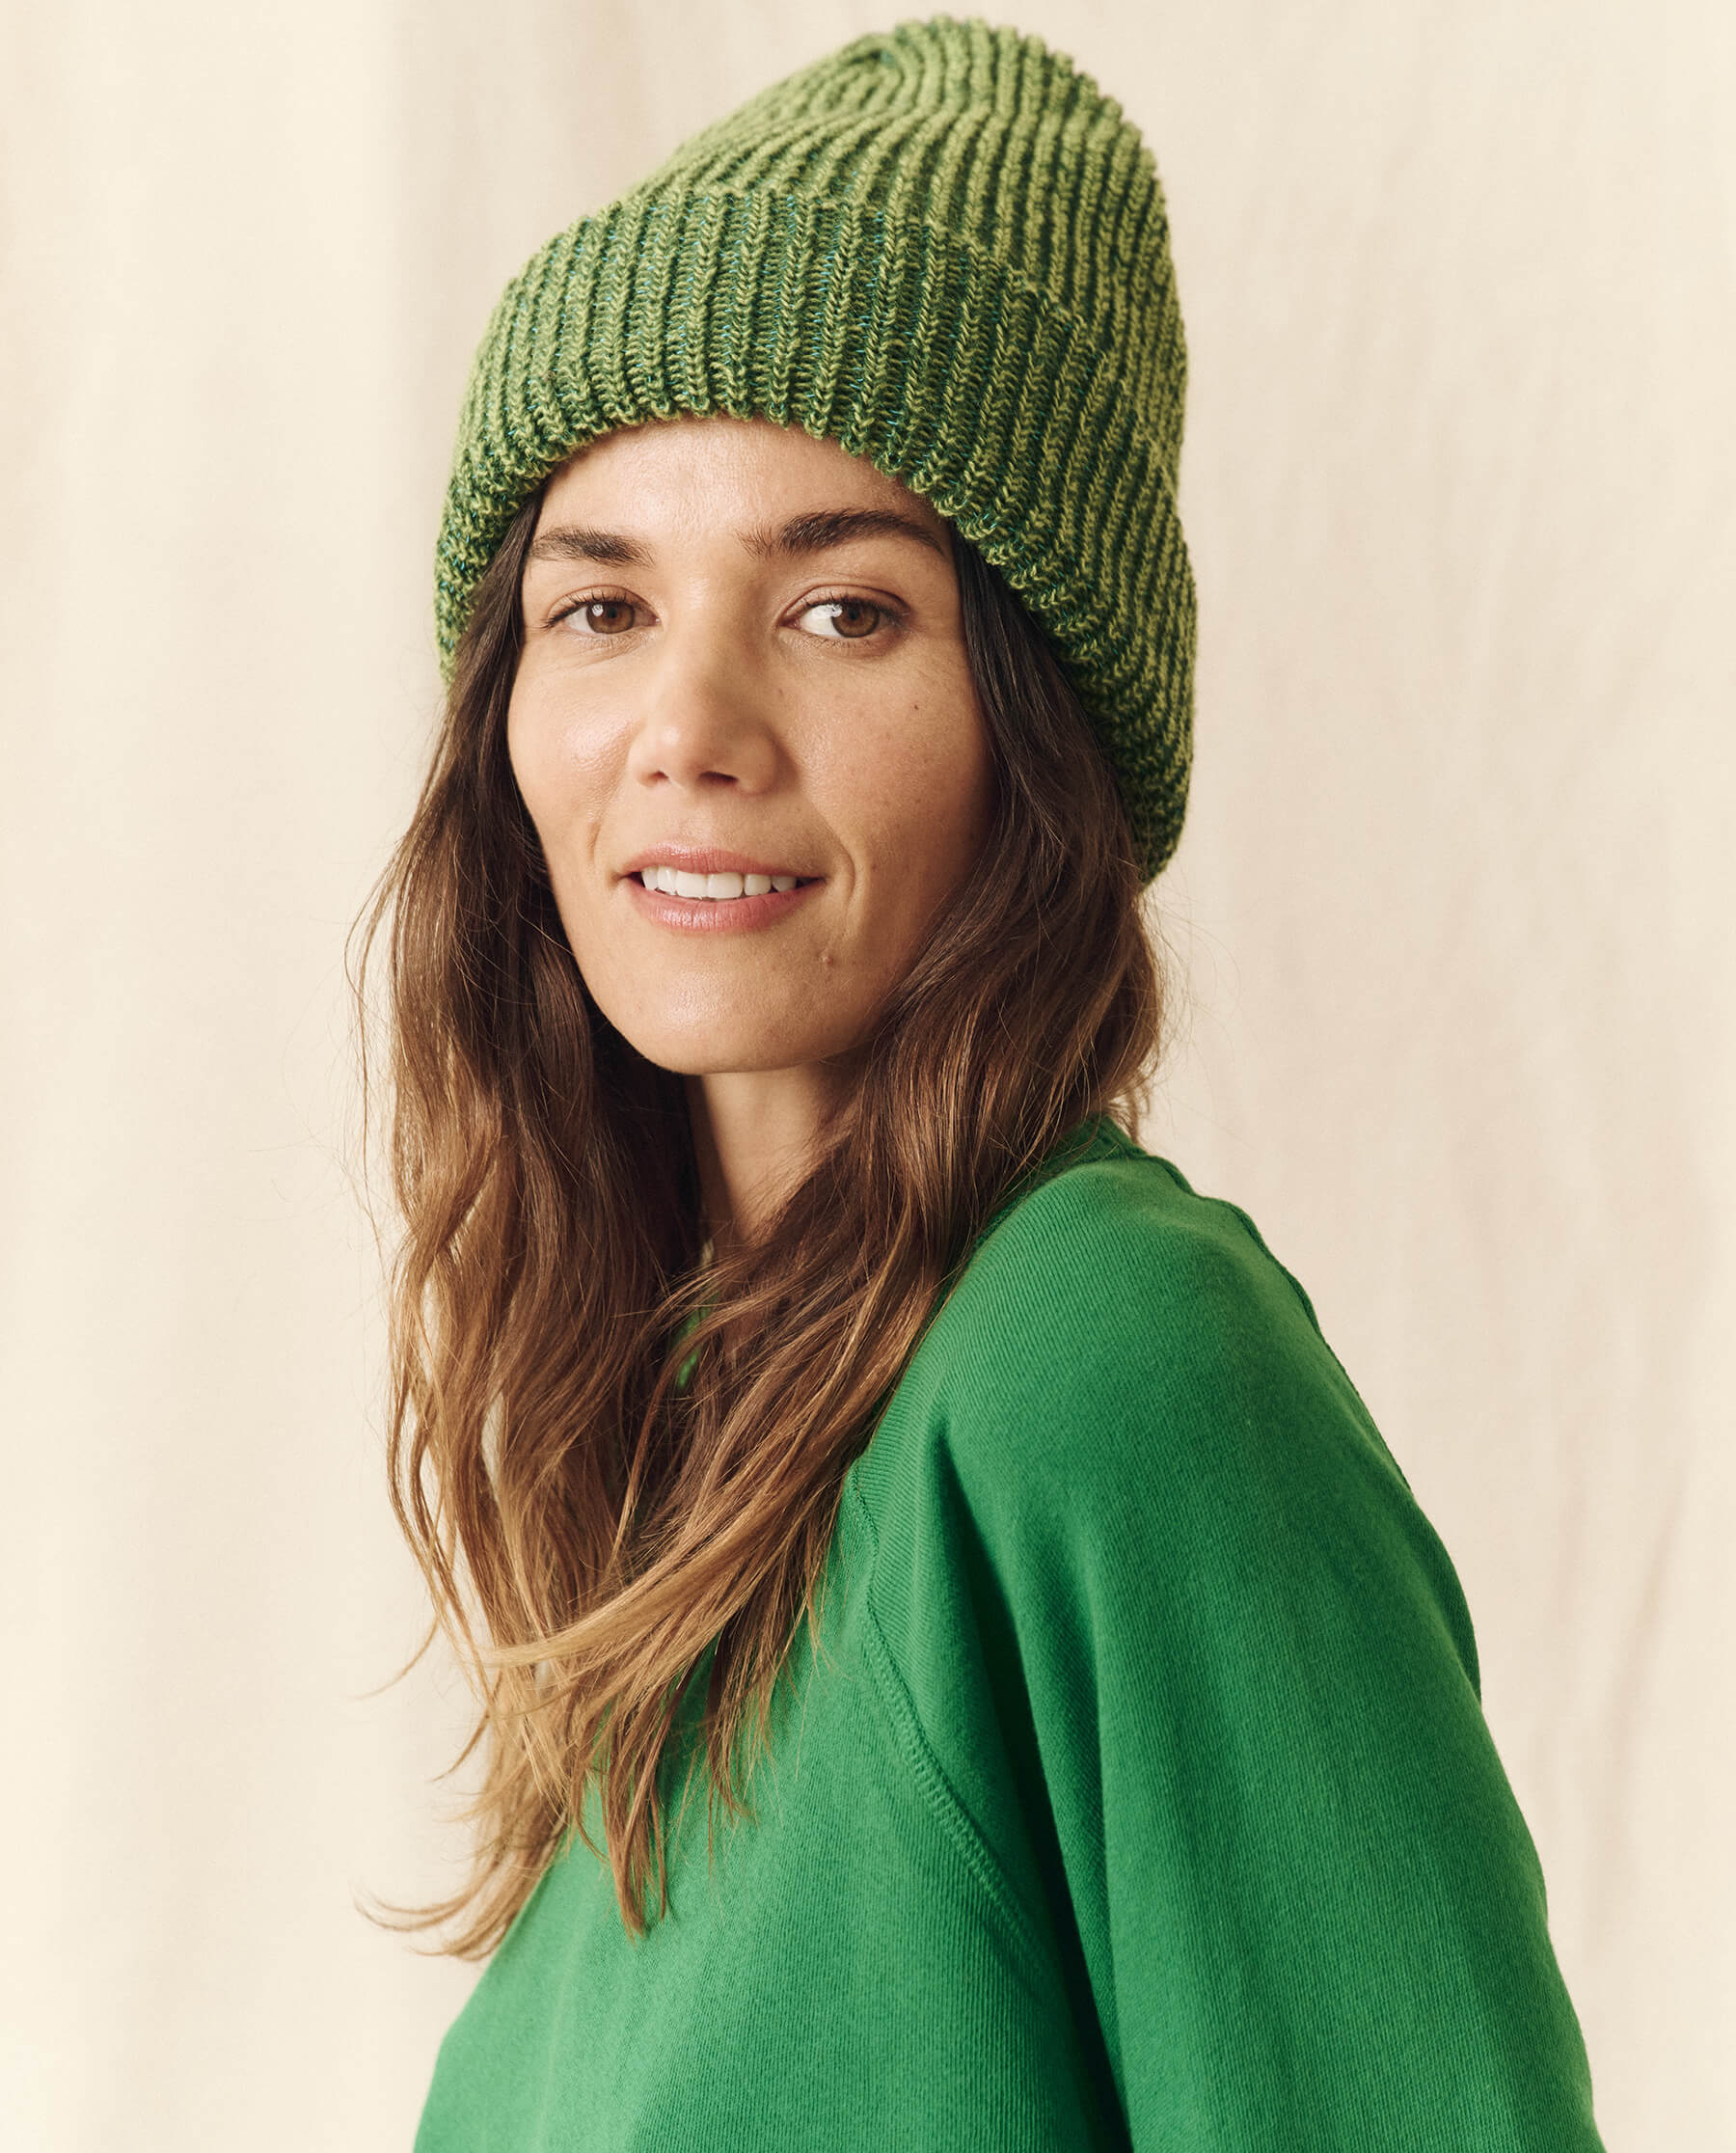 The Beanie. -- Marled Holly Leaf HATS THE GREAT. HOL 23 ACCESSORIES